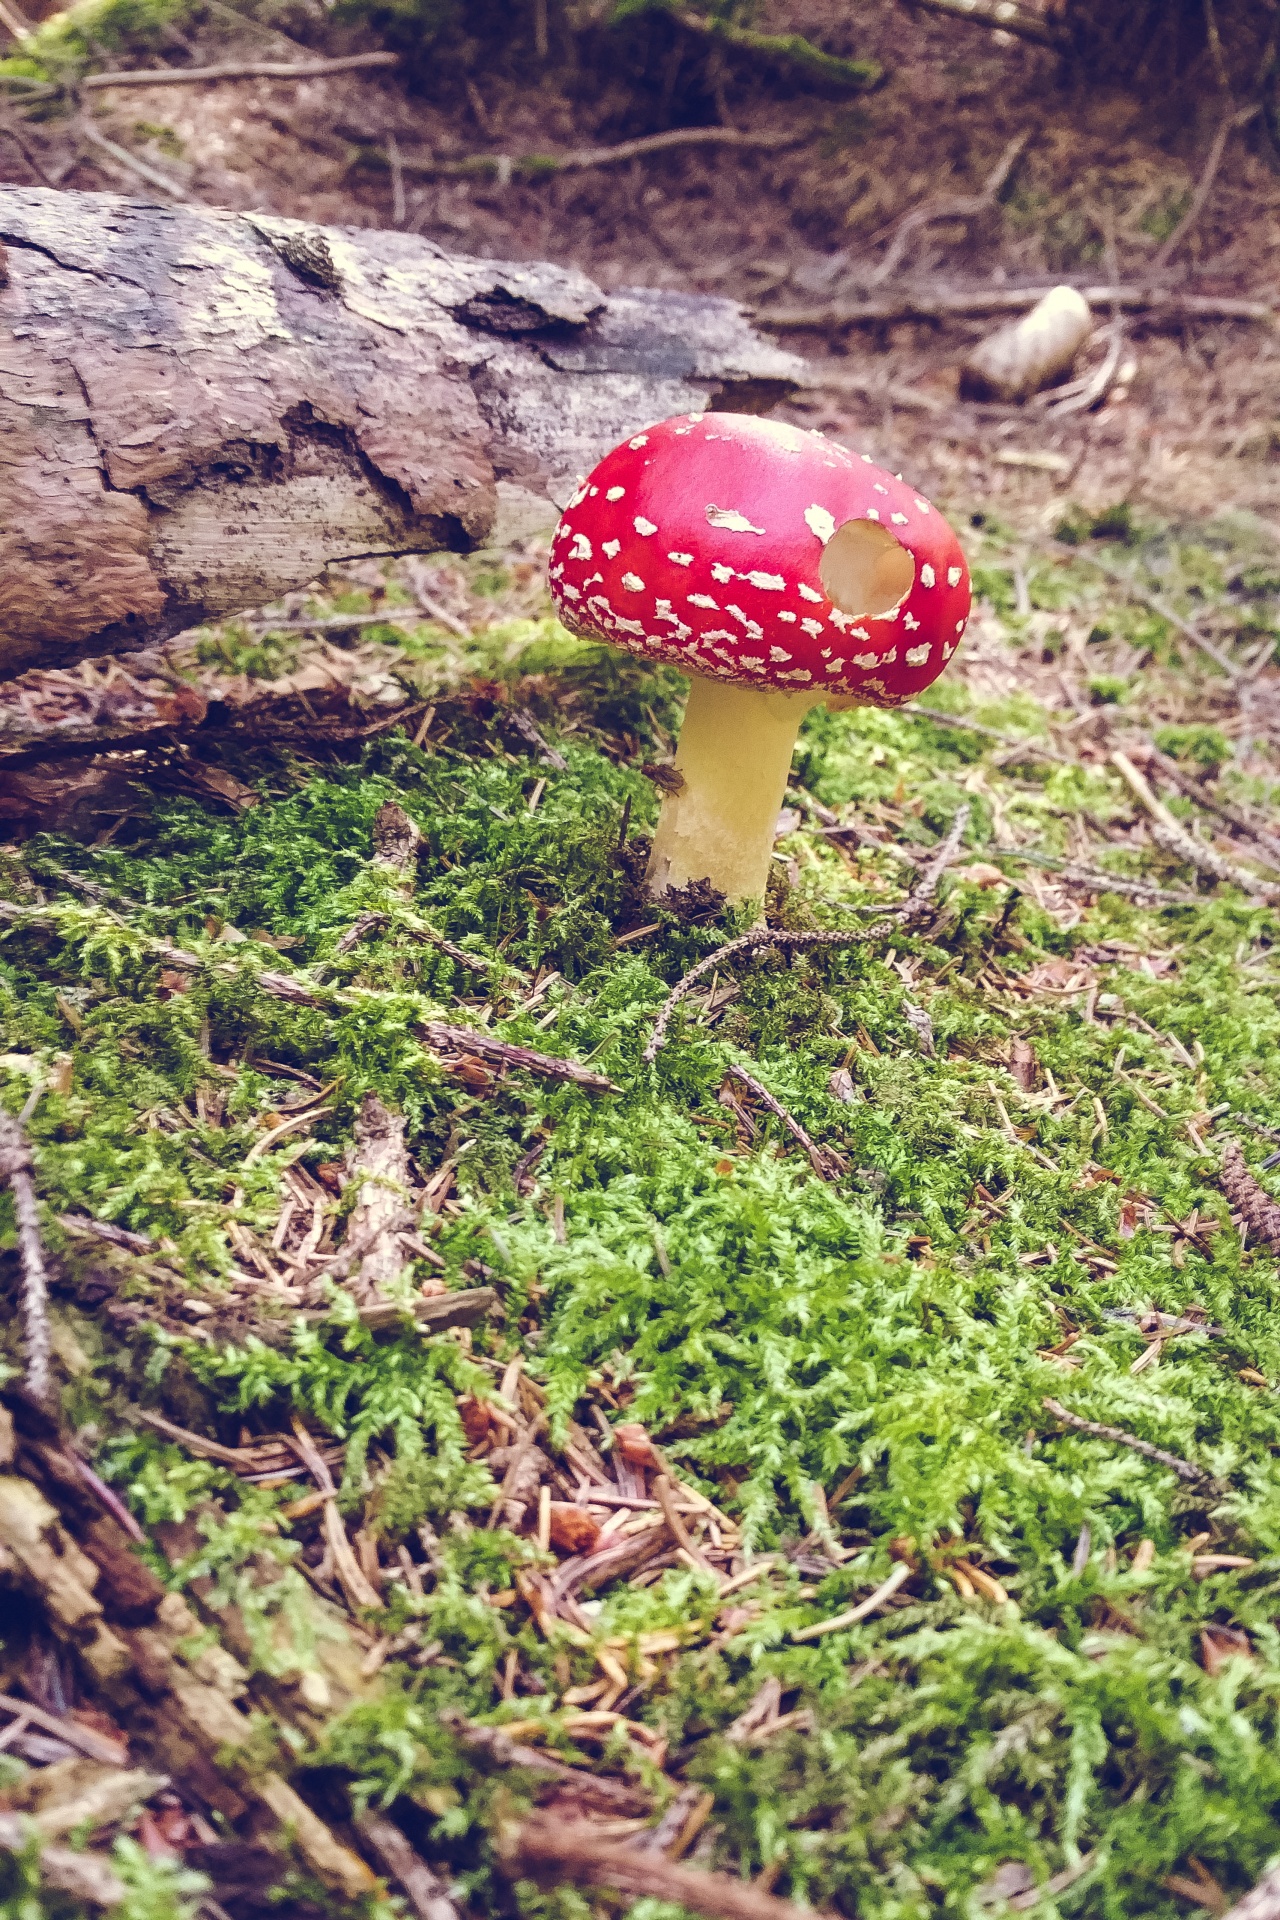 Amanita muscaria growing in a forest